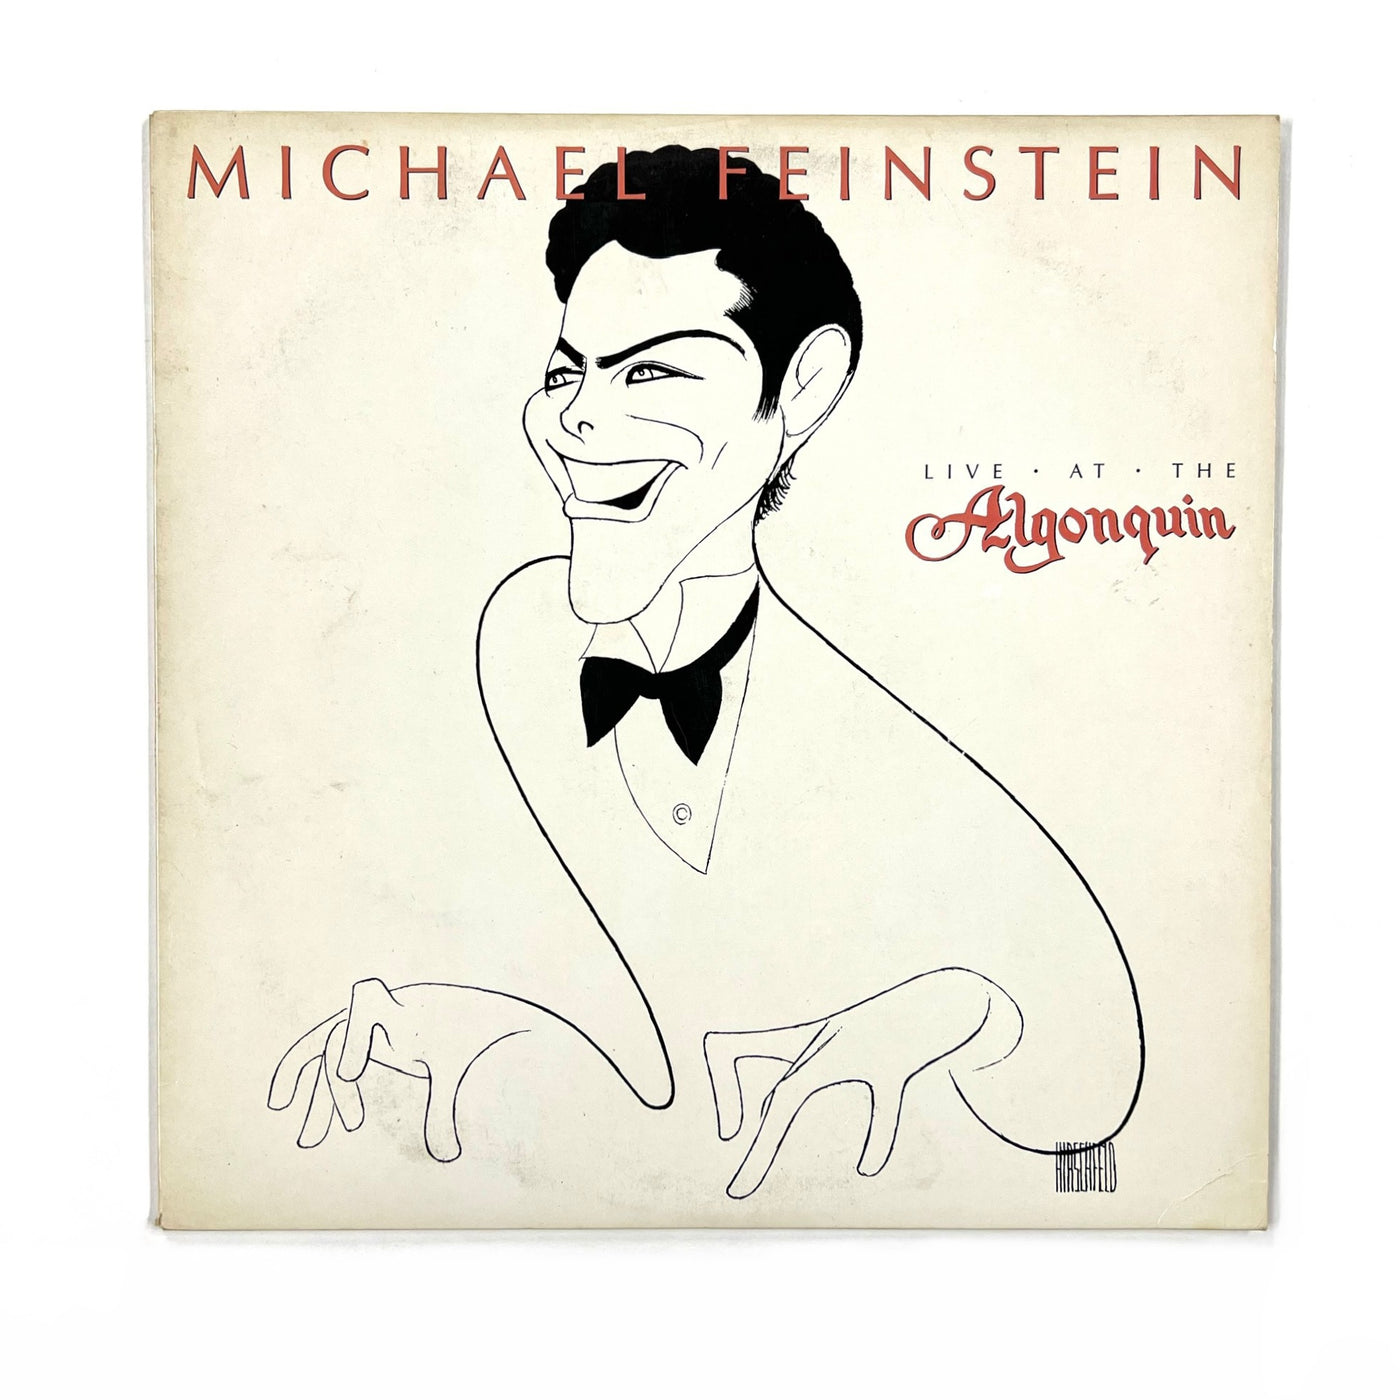 Michael Feinstein - Live At The Algonquin